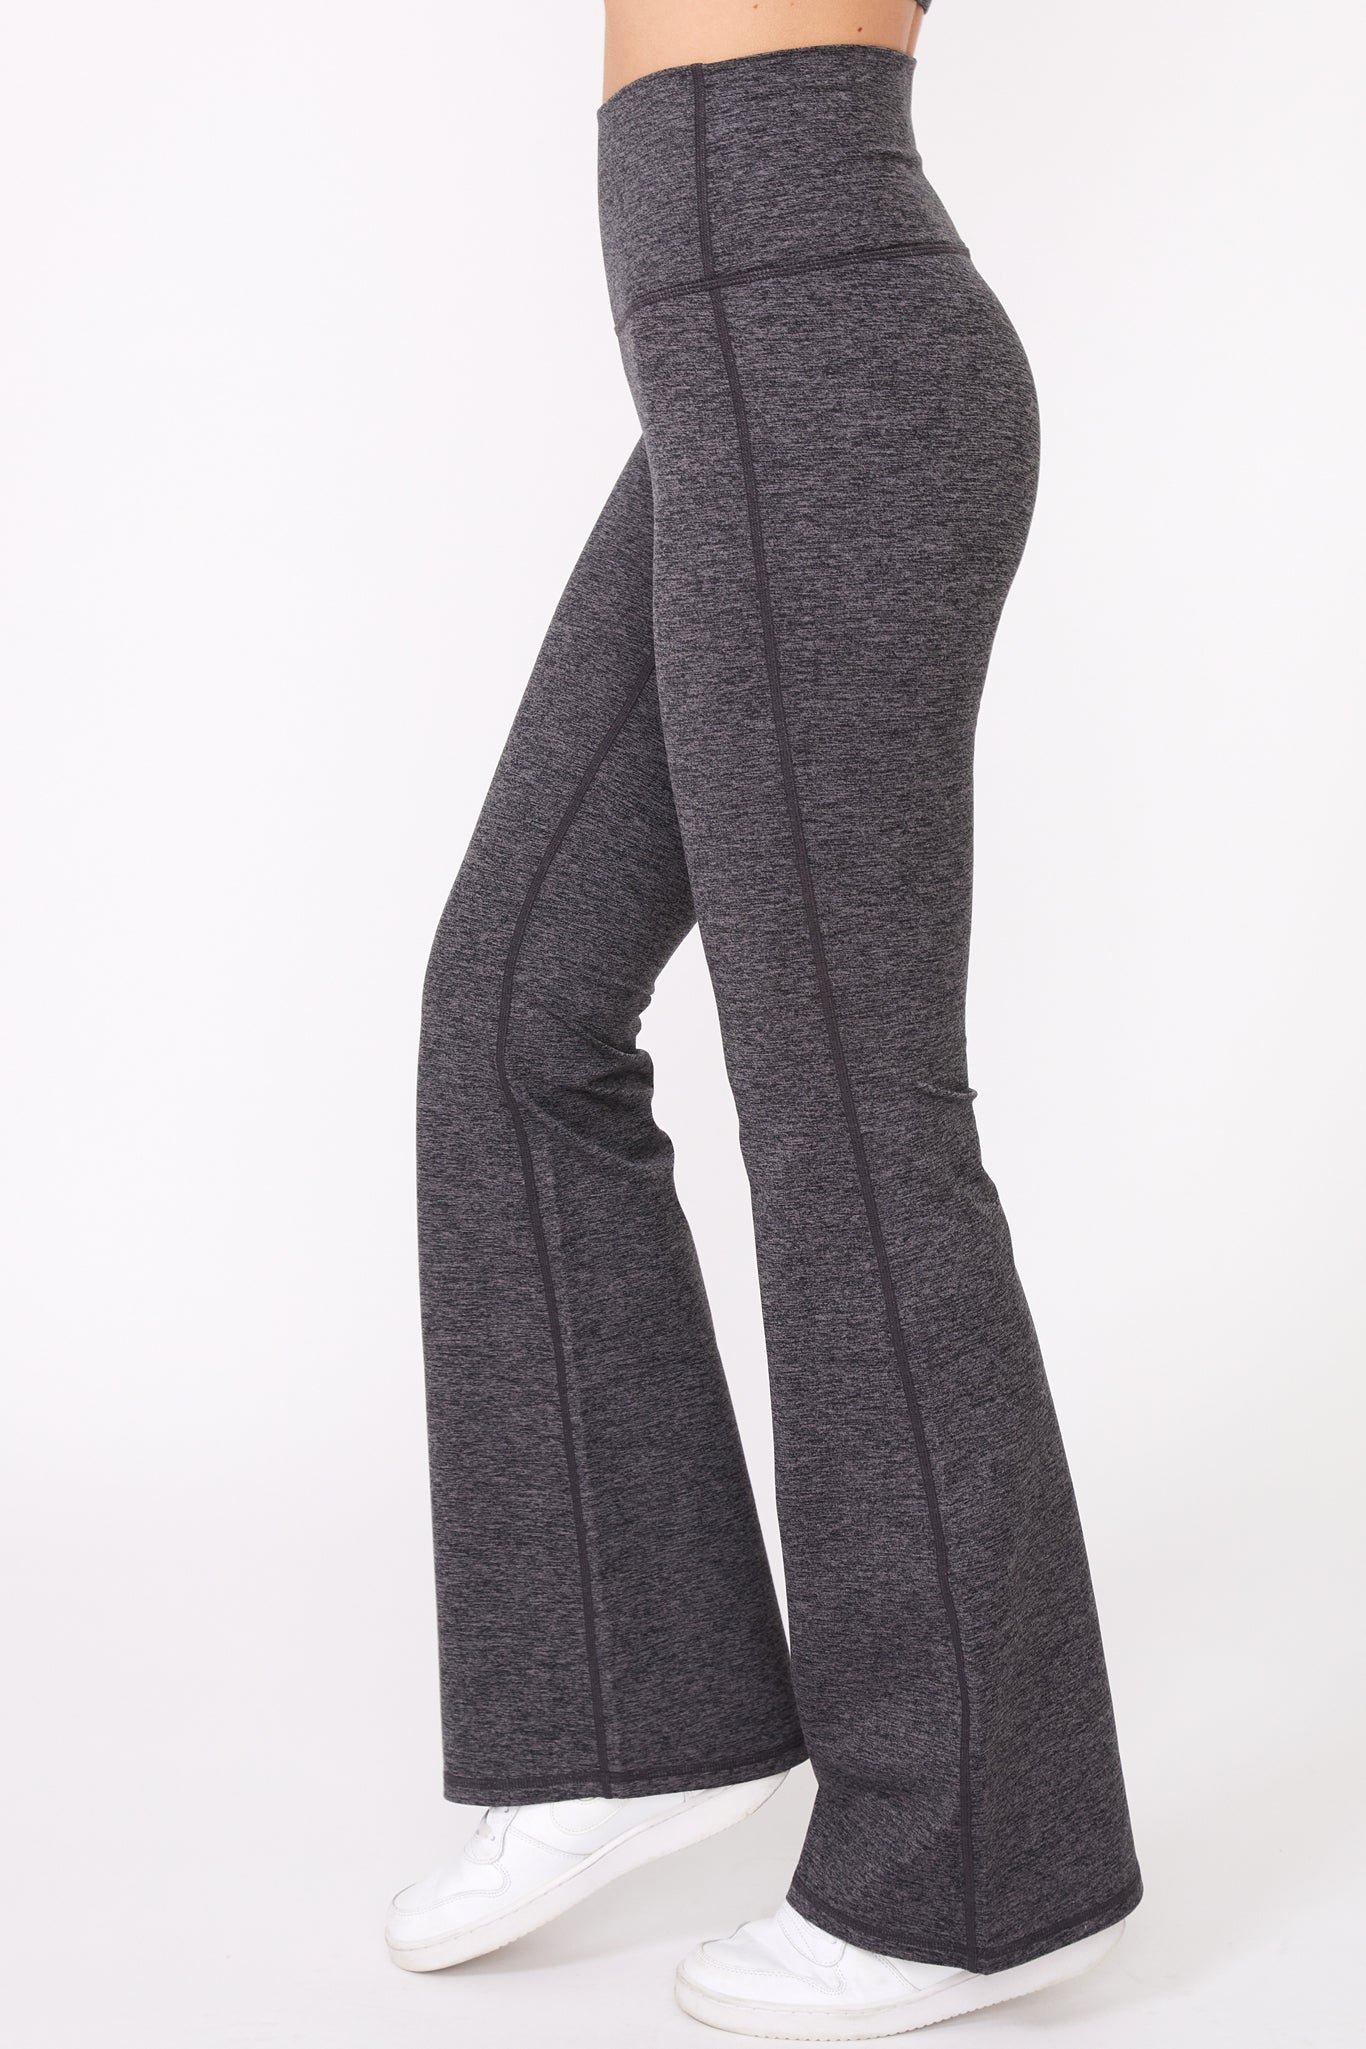 Womens Black And Grey Flare Gray Flare Leggings With Bell Bottom